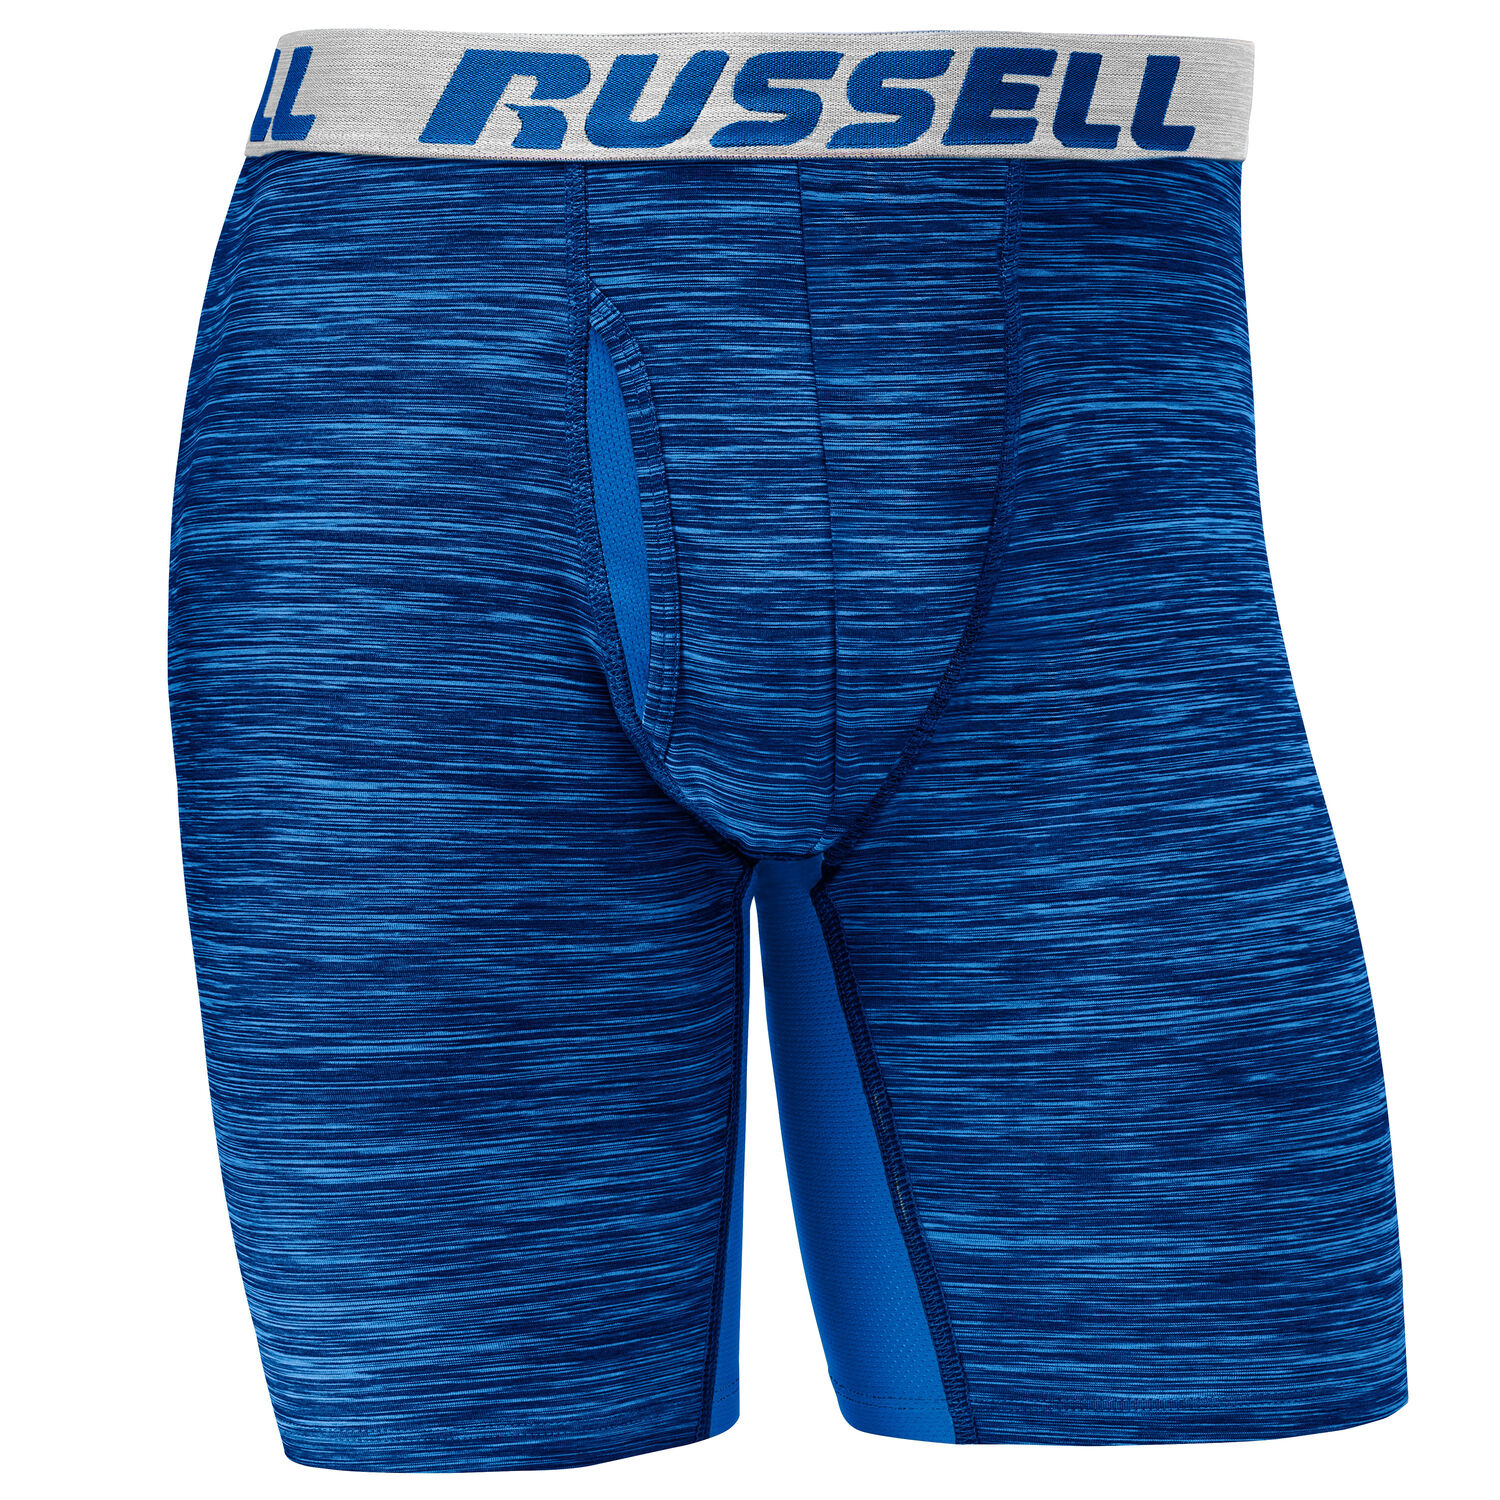 Russell Men's Active Performance Boxer Briefs, 2-Pack 